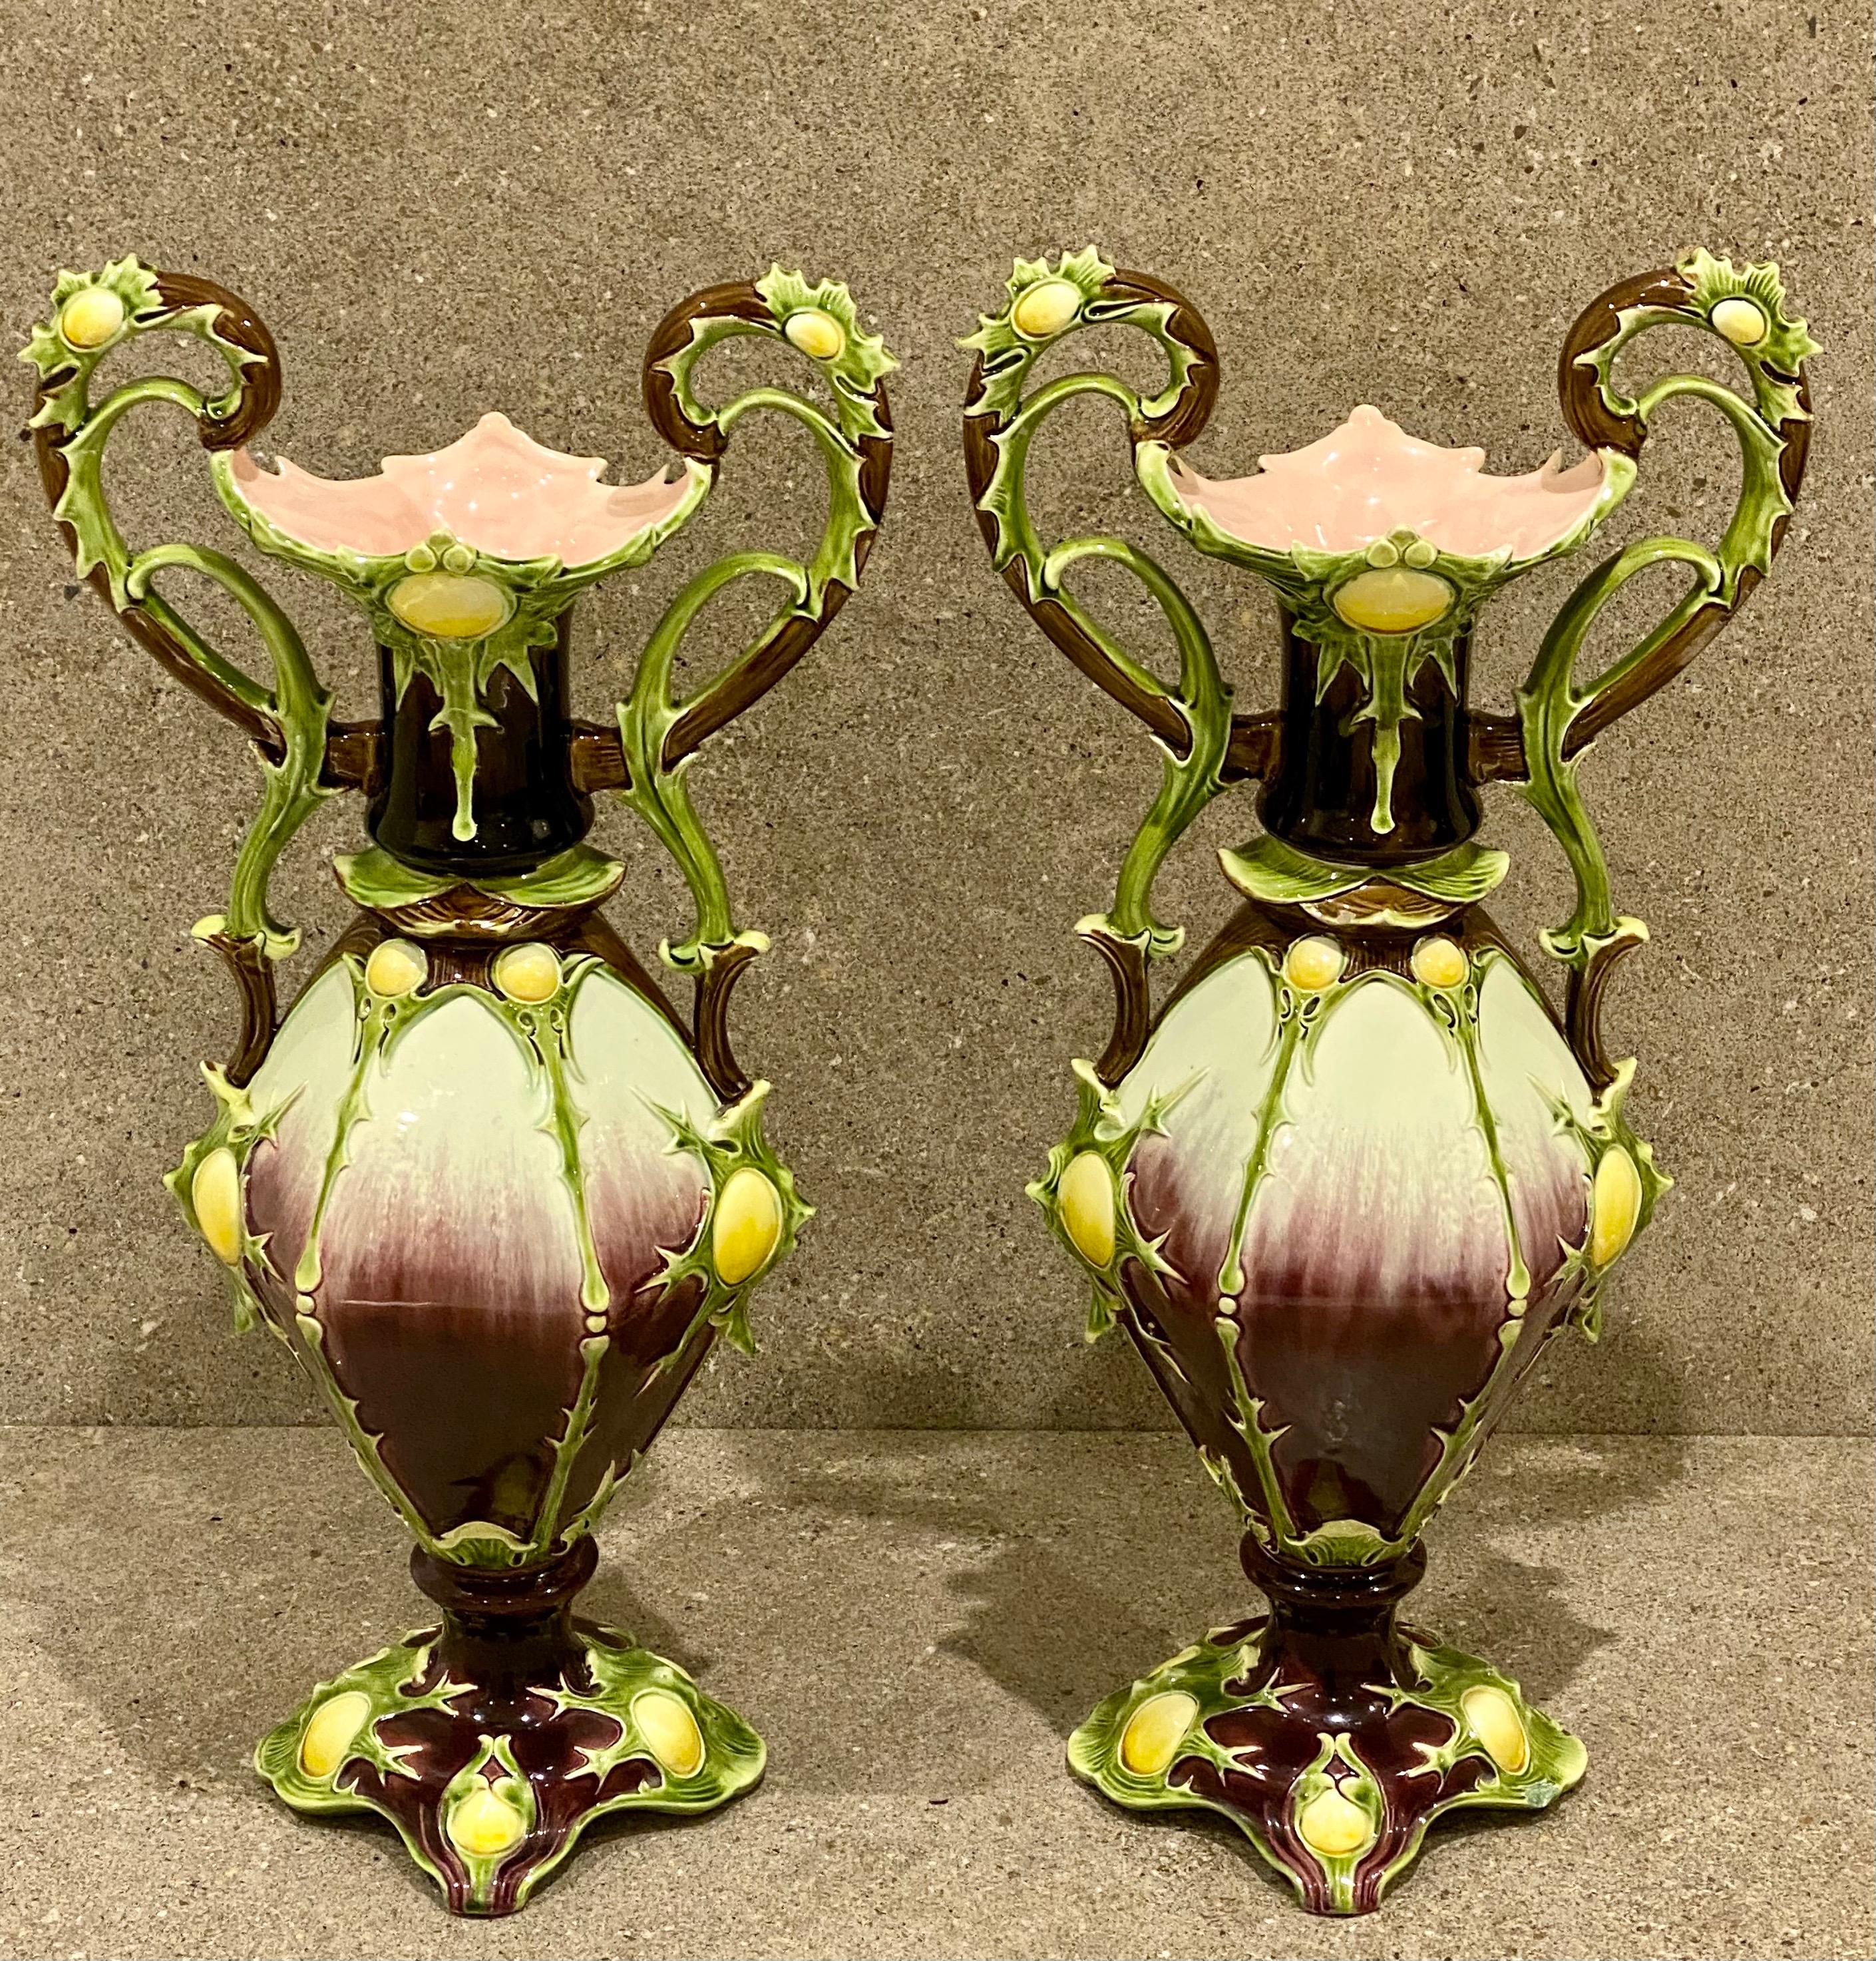 Impressive pair of Majolica vases by Julius Dressler, circa 1885. These large amphora-styled vases captivate due to the unusual design and the marvelous colours. Measure: 20